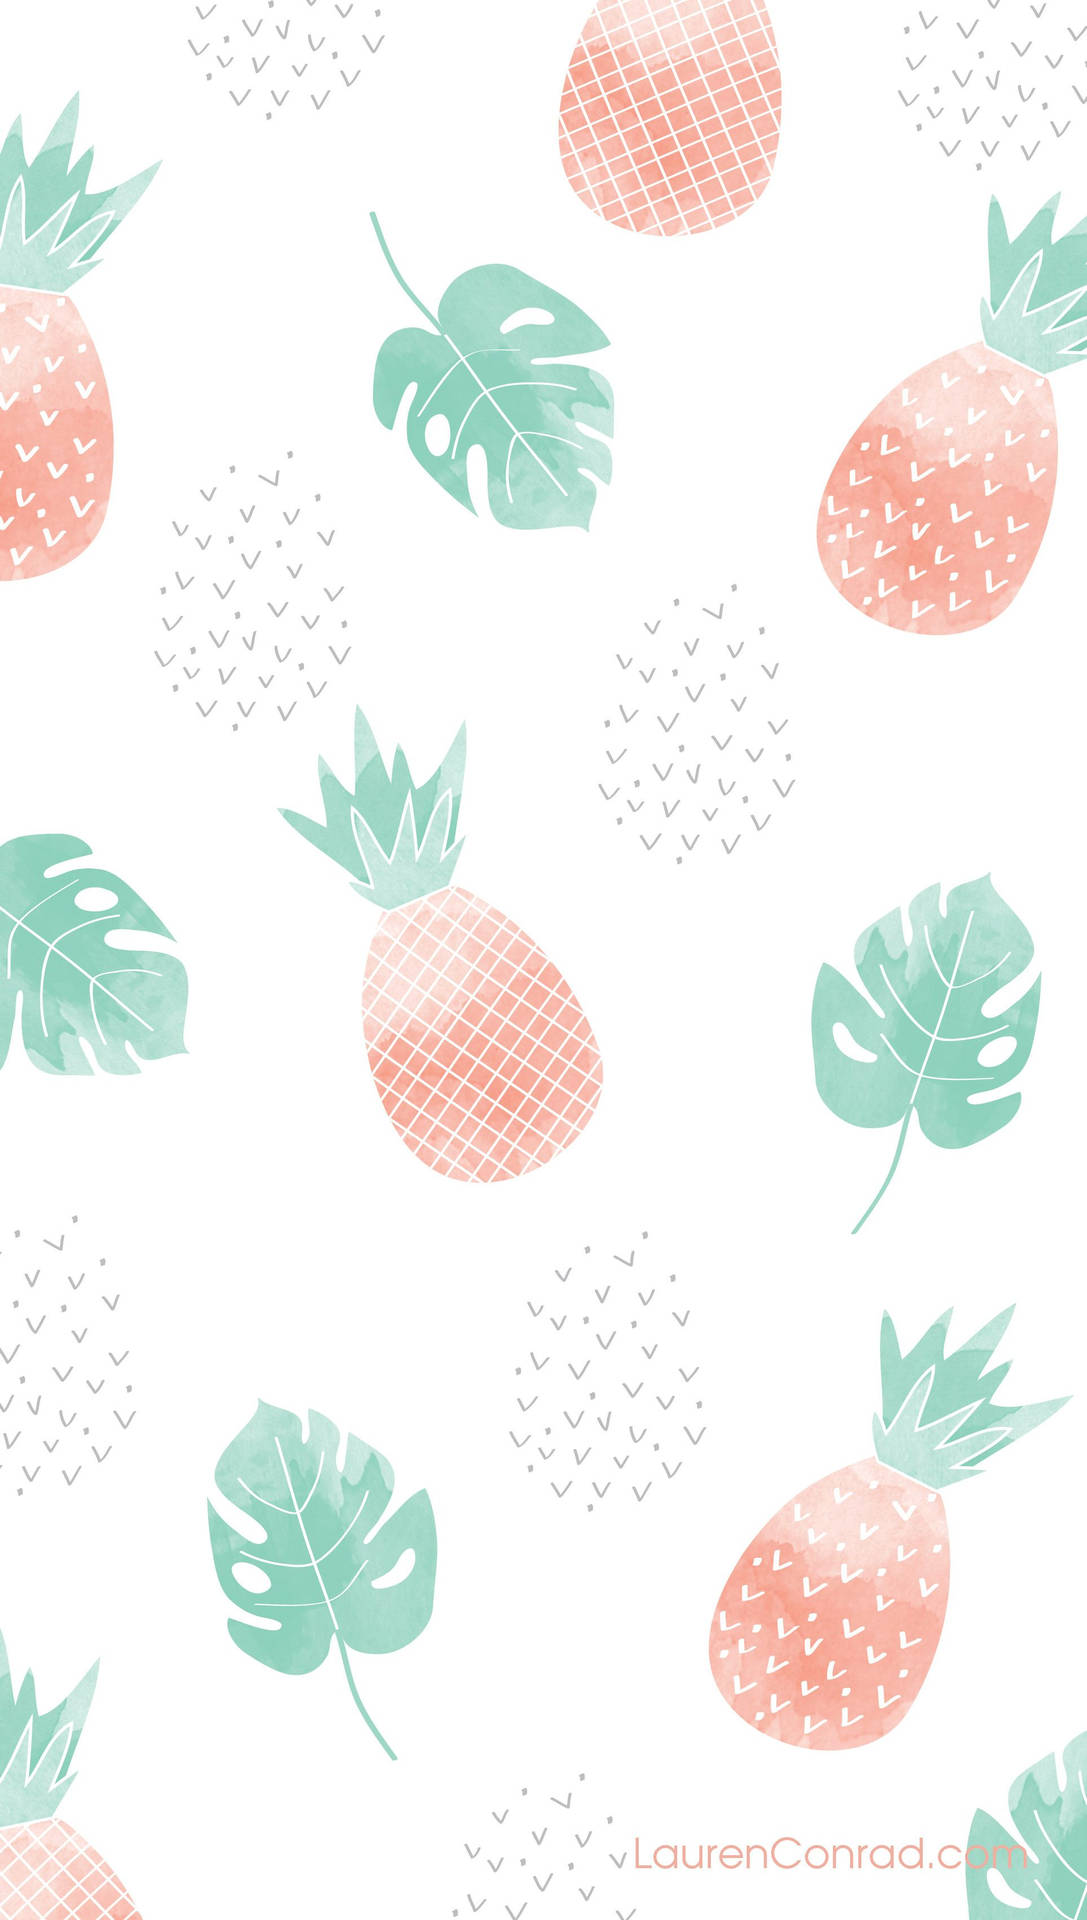 Pineapple And Leaves Cute IPhone Wallpaper